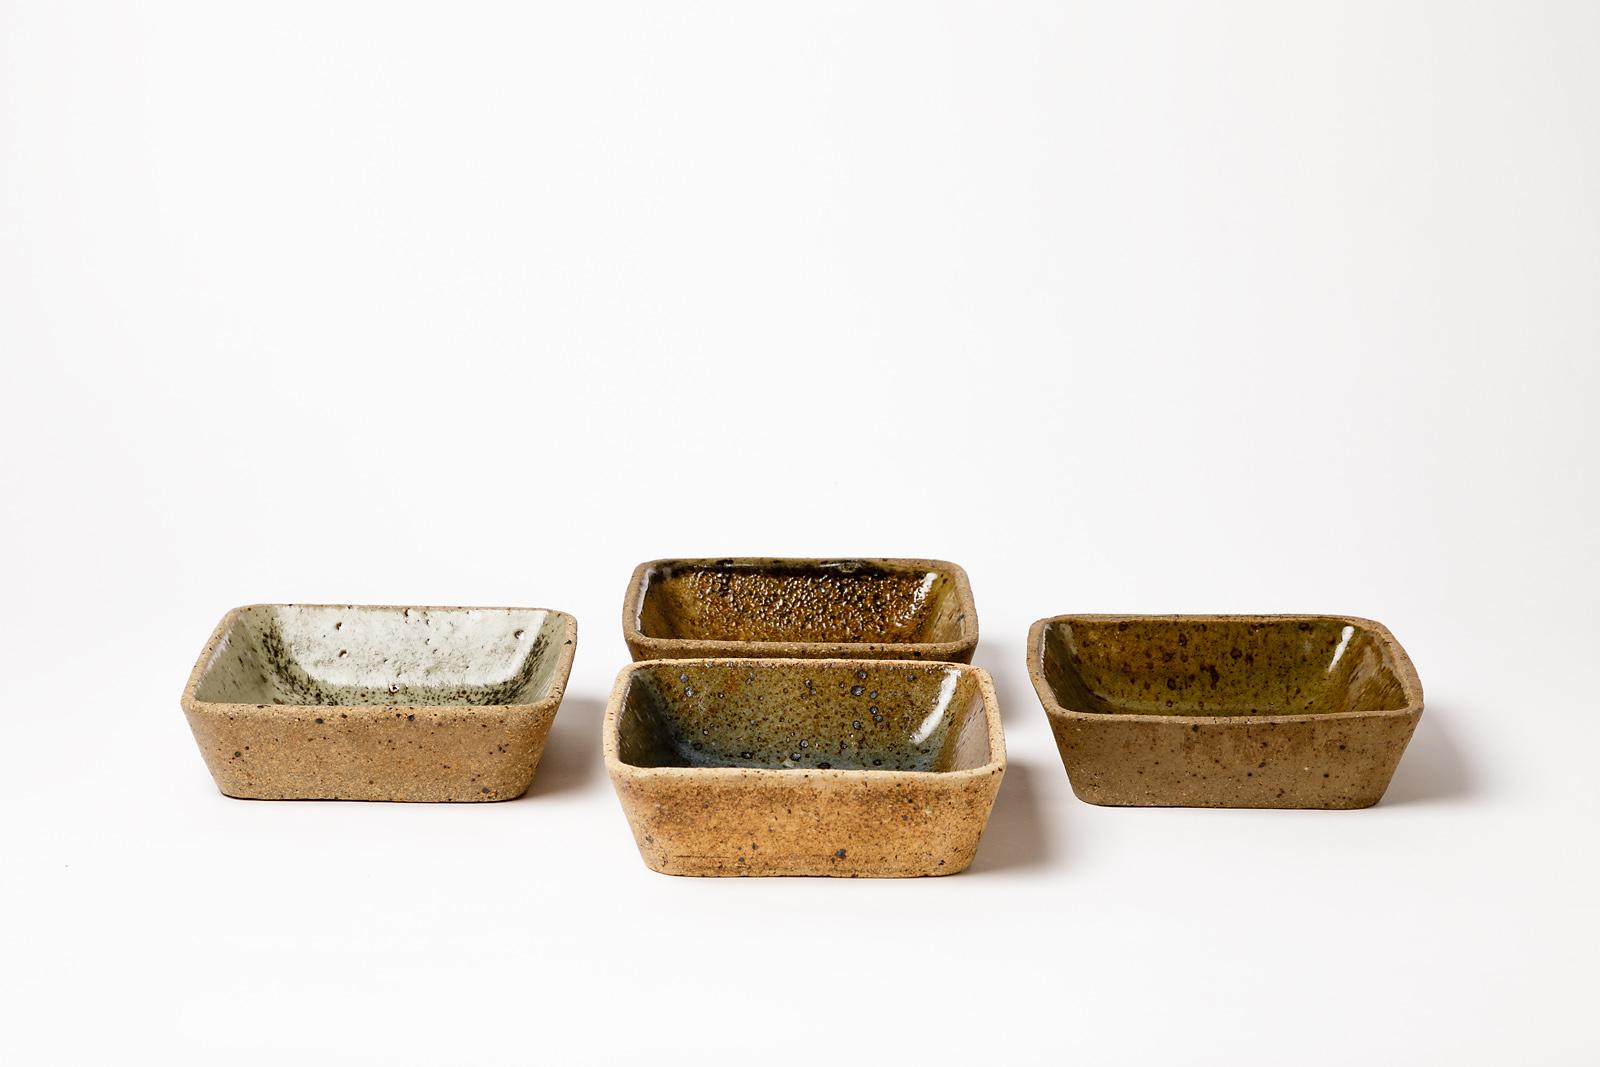 Pierre Digan 

Elegant stoneware ceramic set of 4 bowls or dishes by the French artist.

4 differents ceramic glazes colors, brown, green, blue and grey.

Original set realized circa 1975 in La Borne, mid-20th century design.

Original